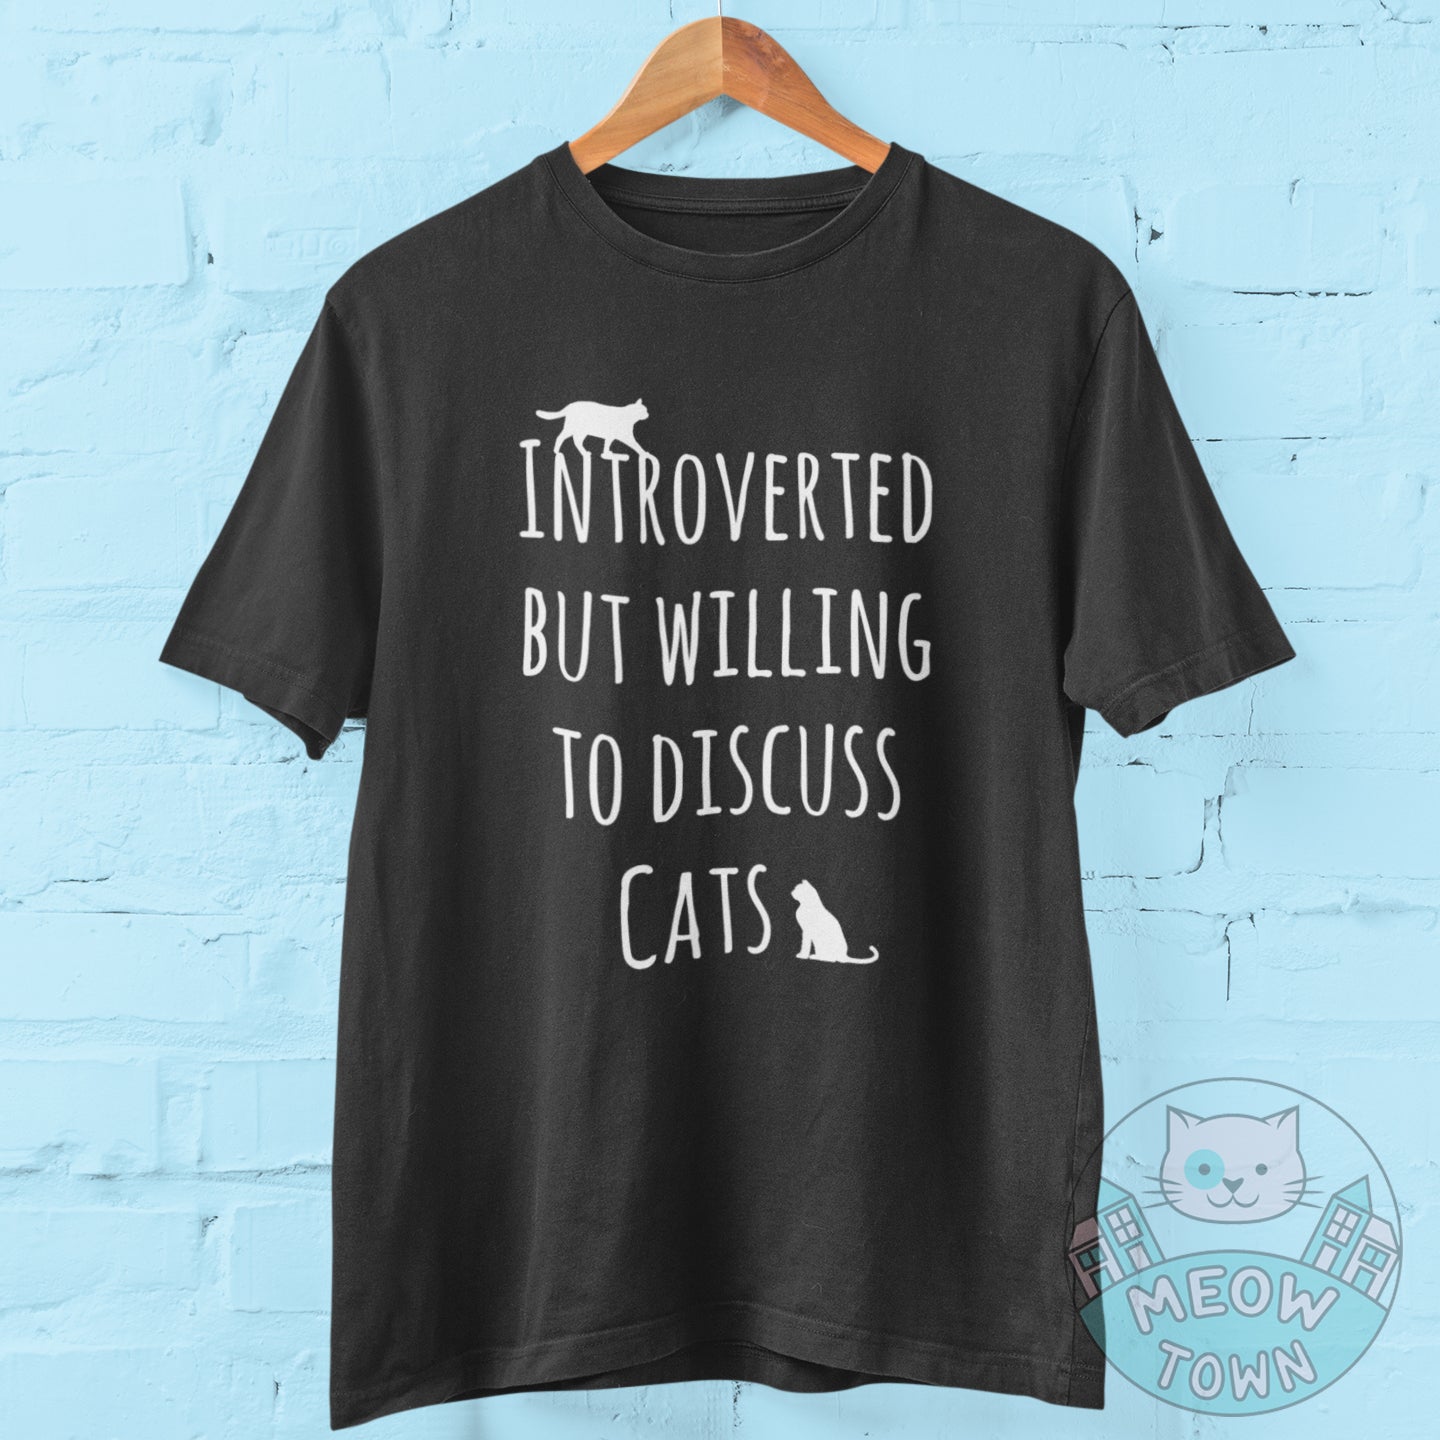 Introverted But Willing To Discuss Cats T-Shirt